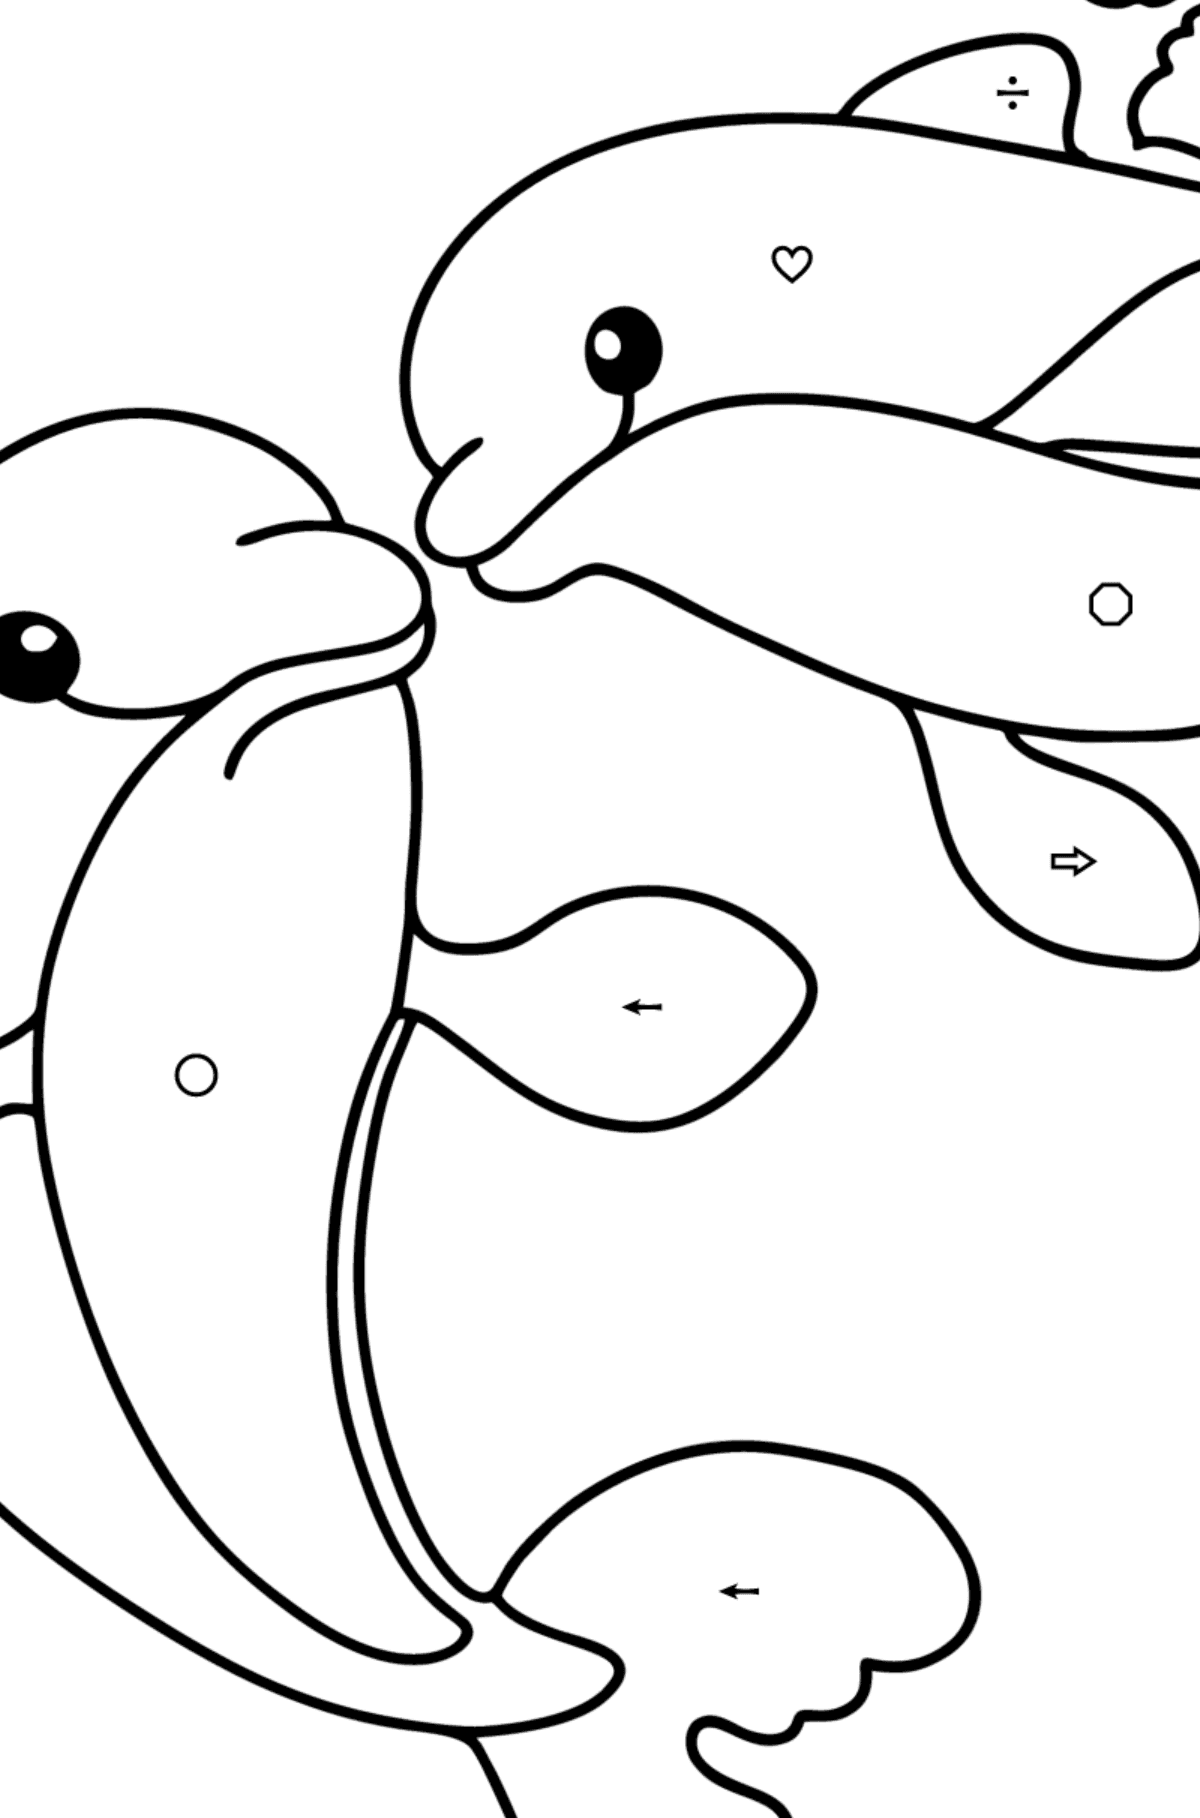 Cute Dolphins coloring page - Coloring by Symbols and Geometric Shapes for Kids